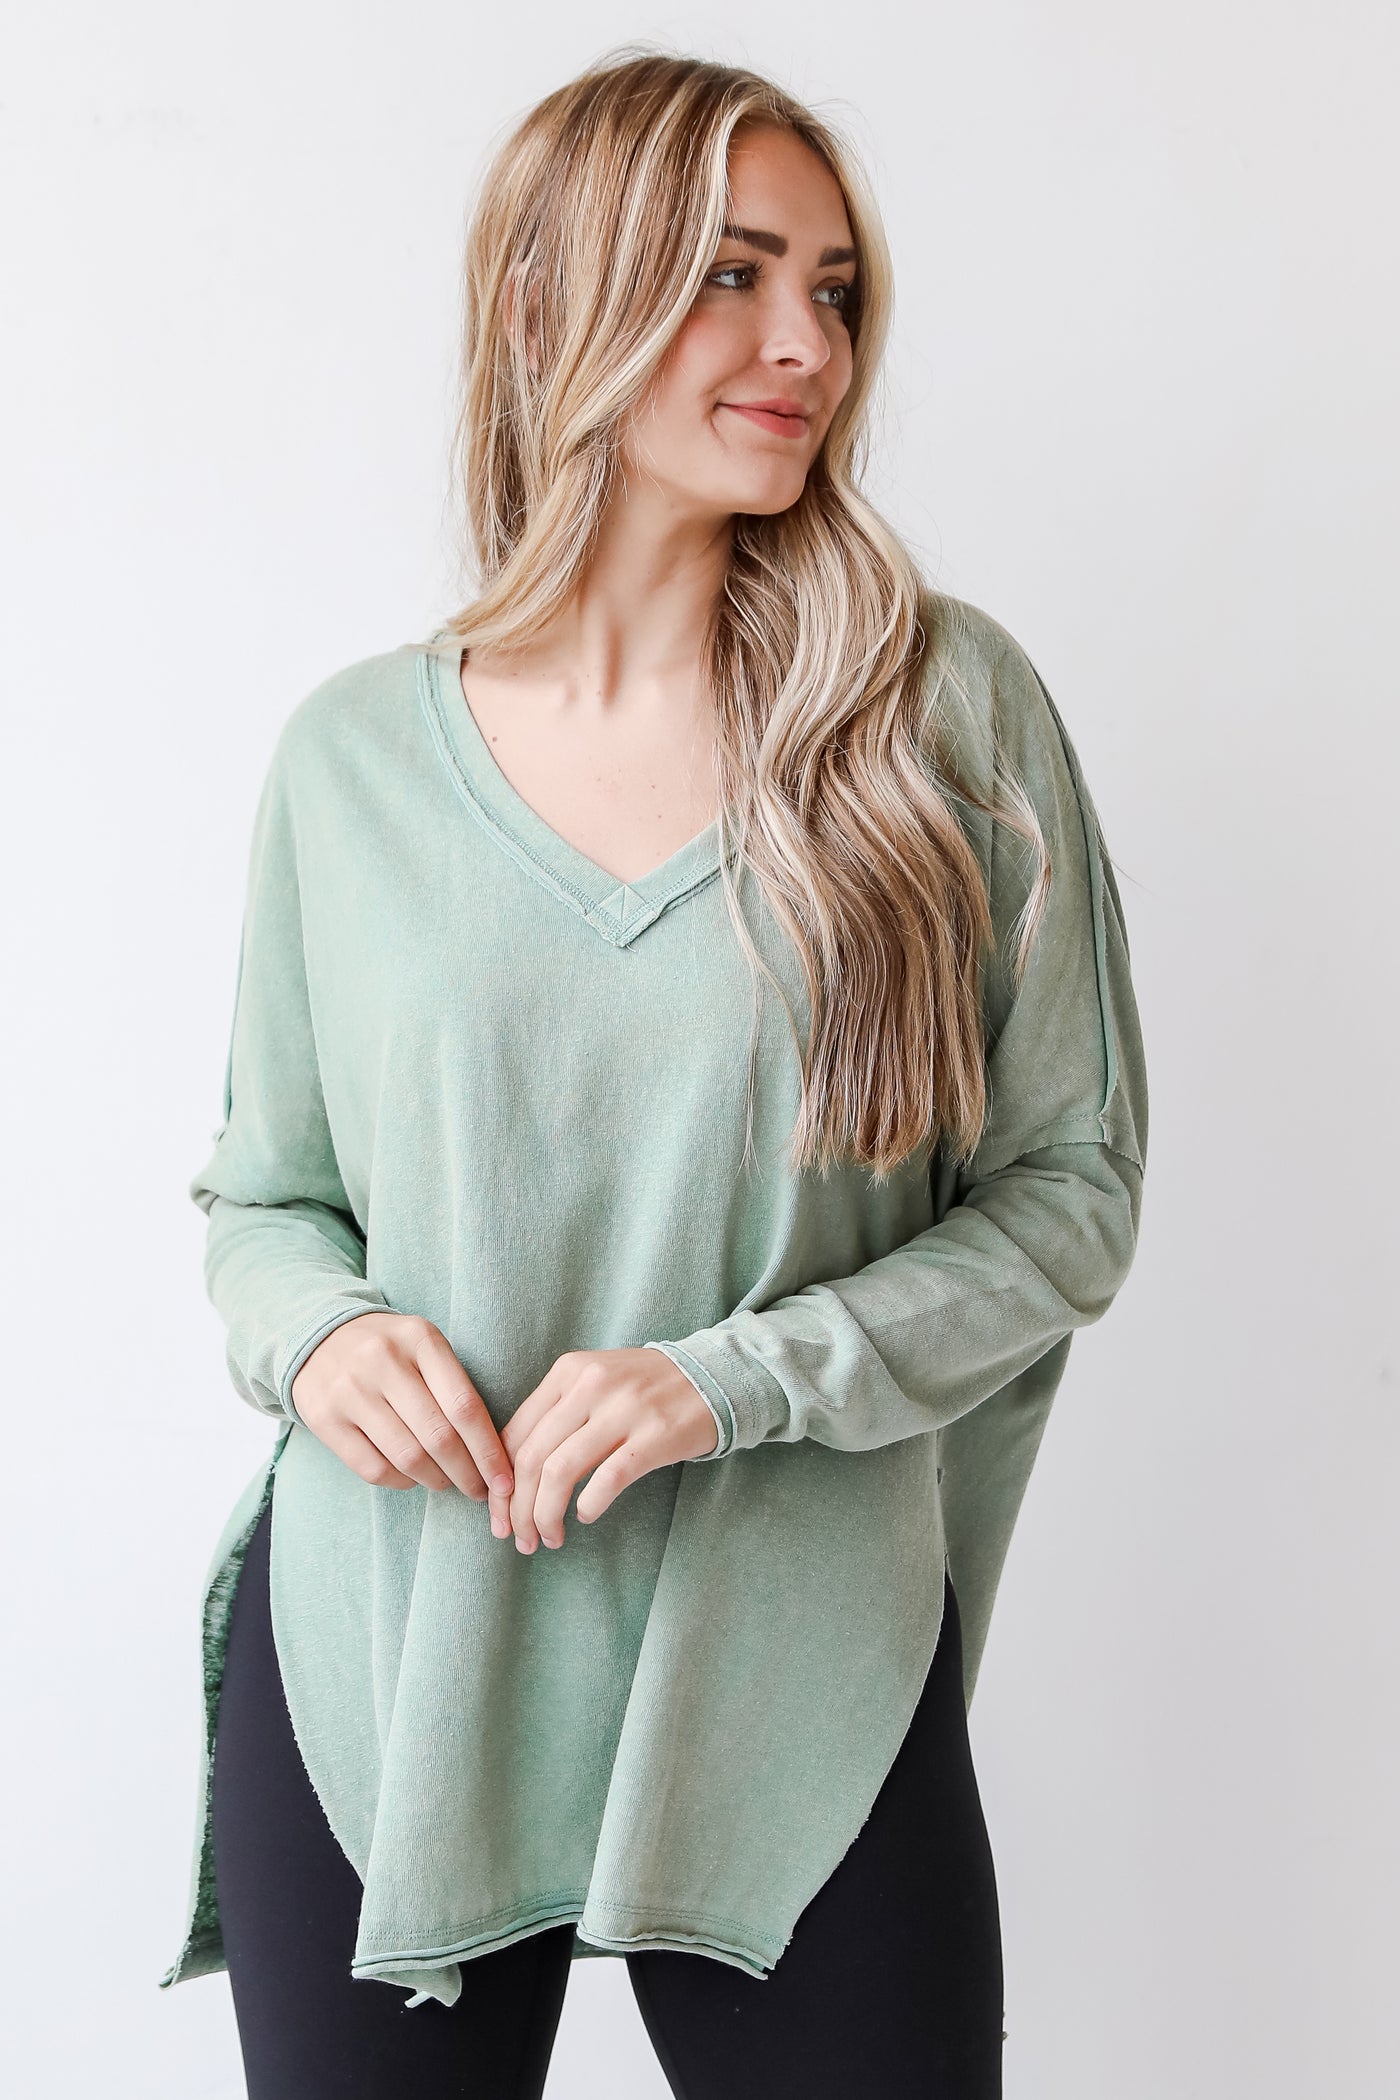 green knit top